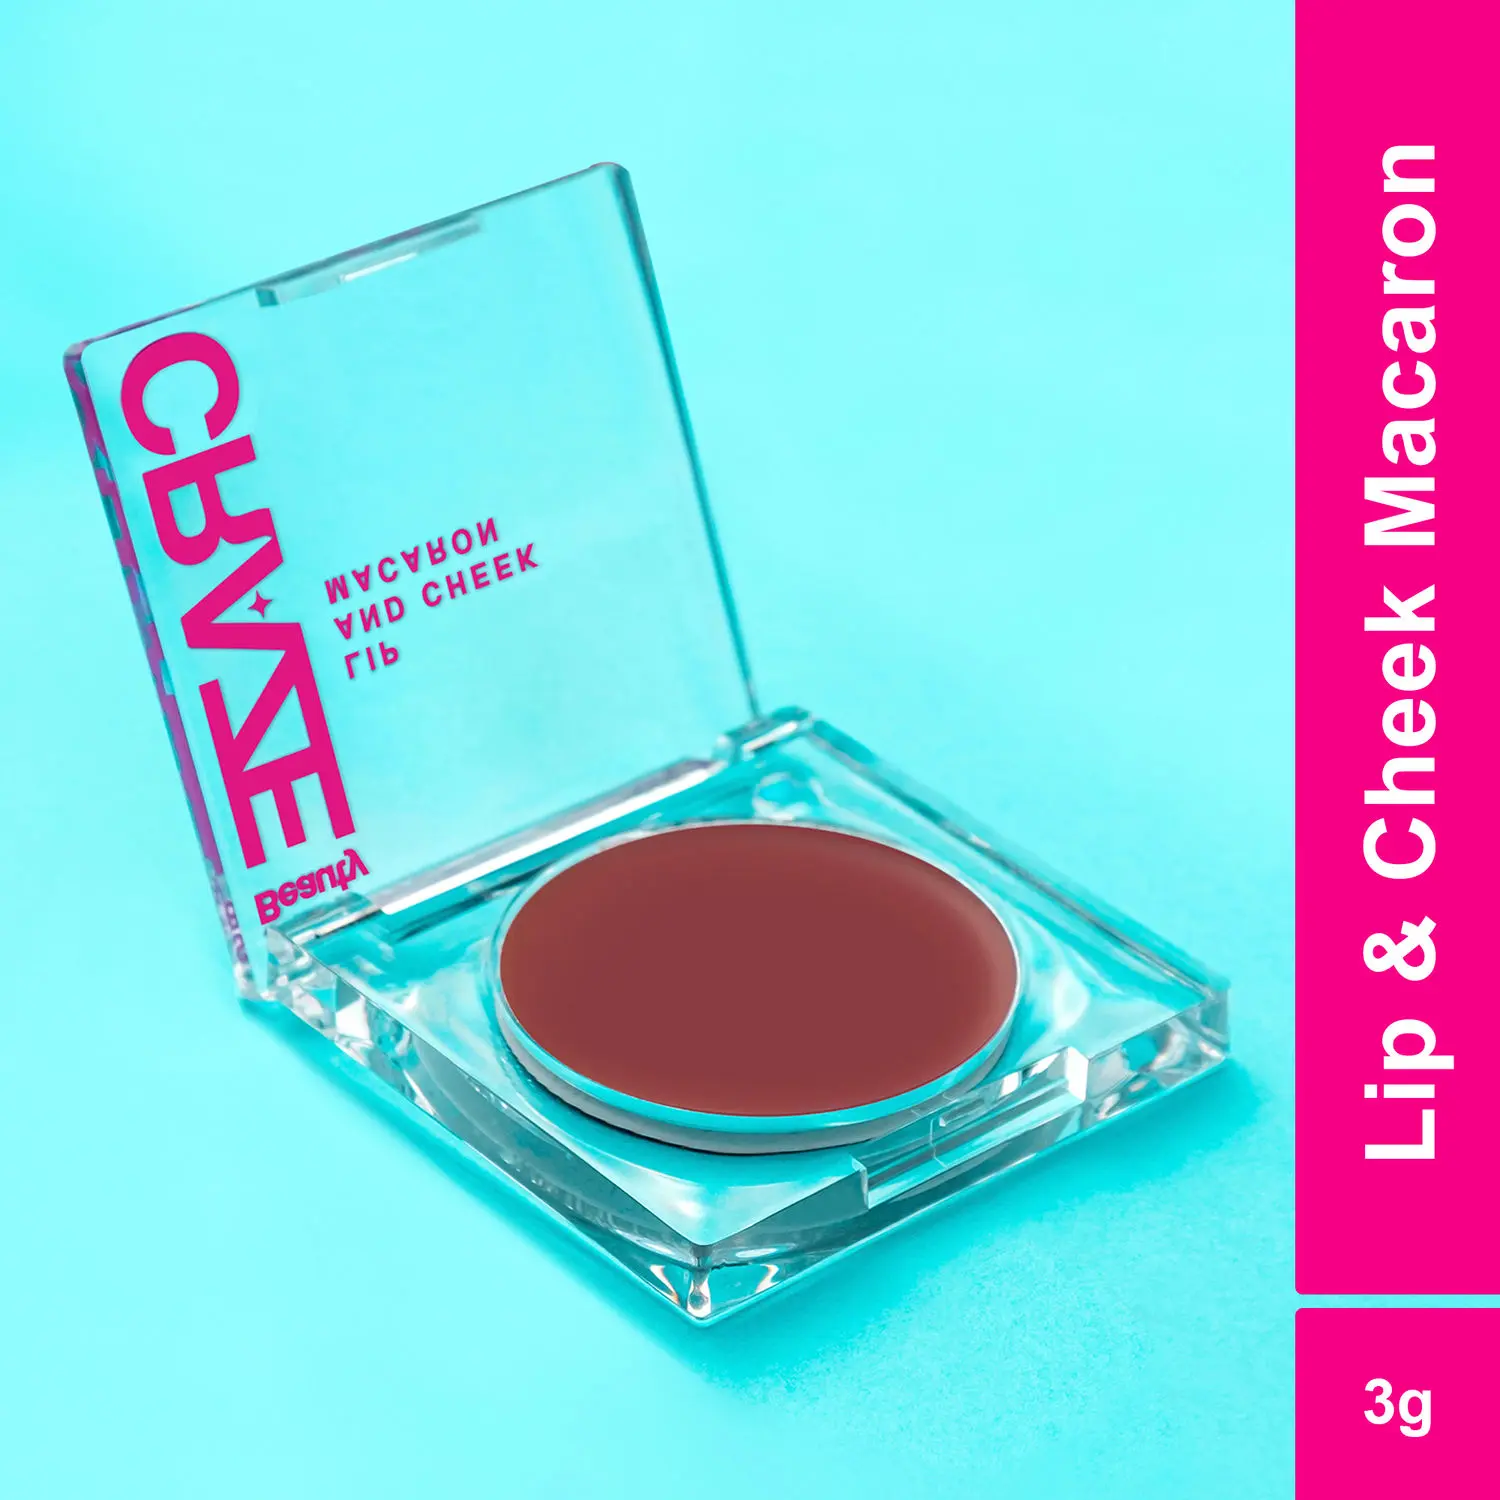 Swiss Beauty Craze Lip and Cheek Macaron| With goodness of Vitamin E and Olive oil | Multipurpose cream for Lips, cheeks and eyelids |Shade- 5, Strawberry